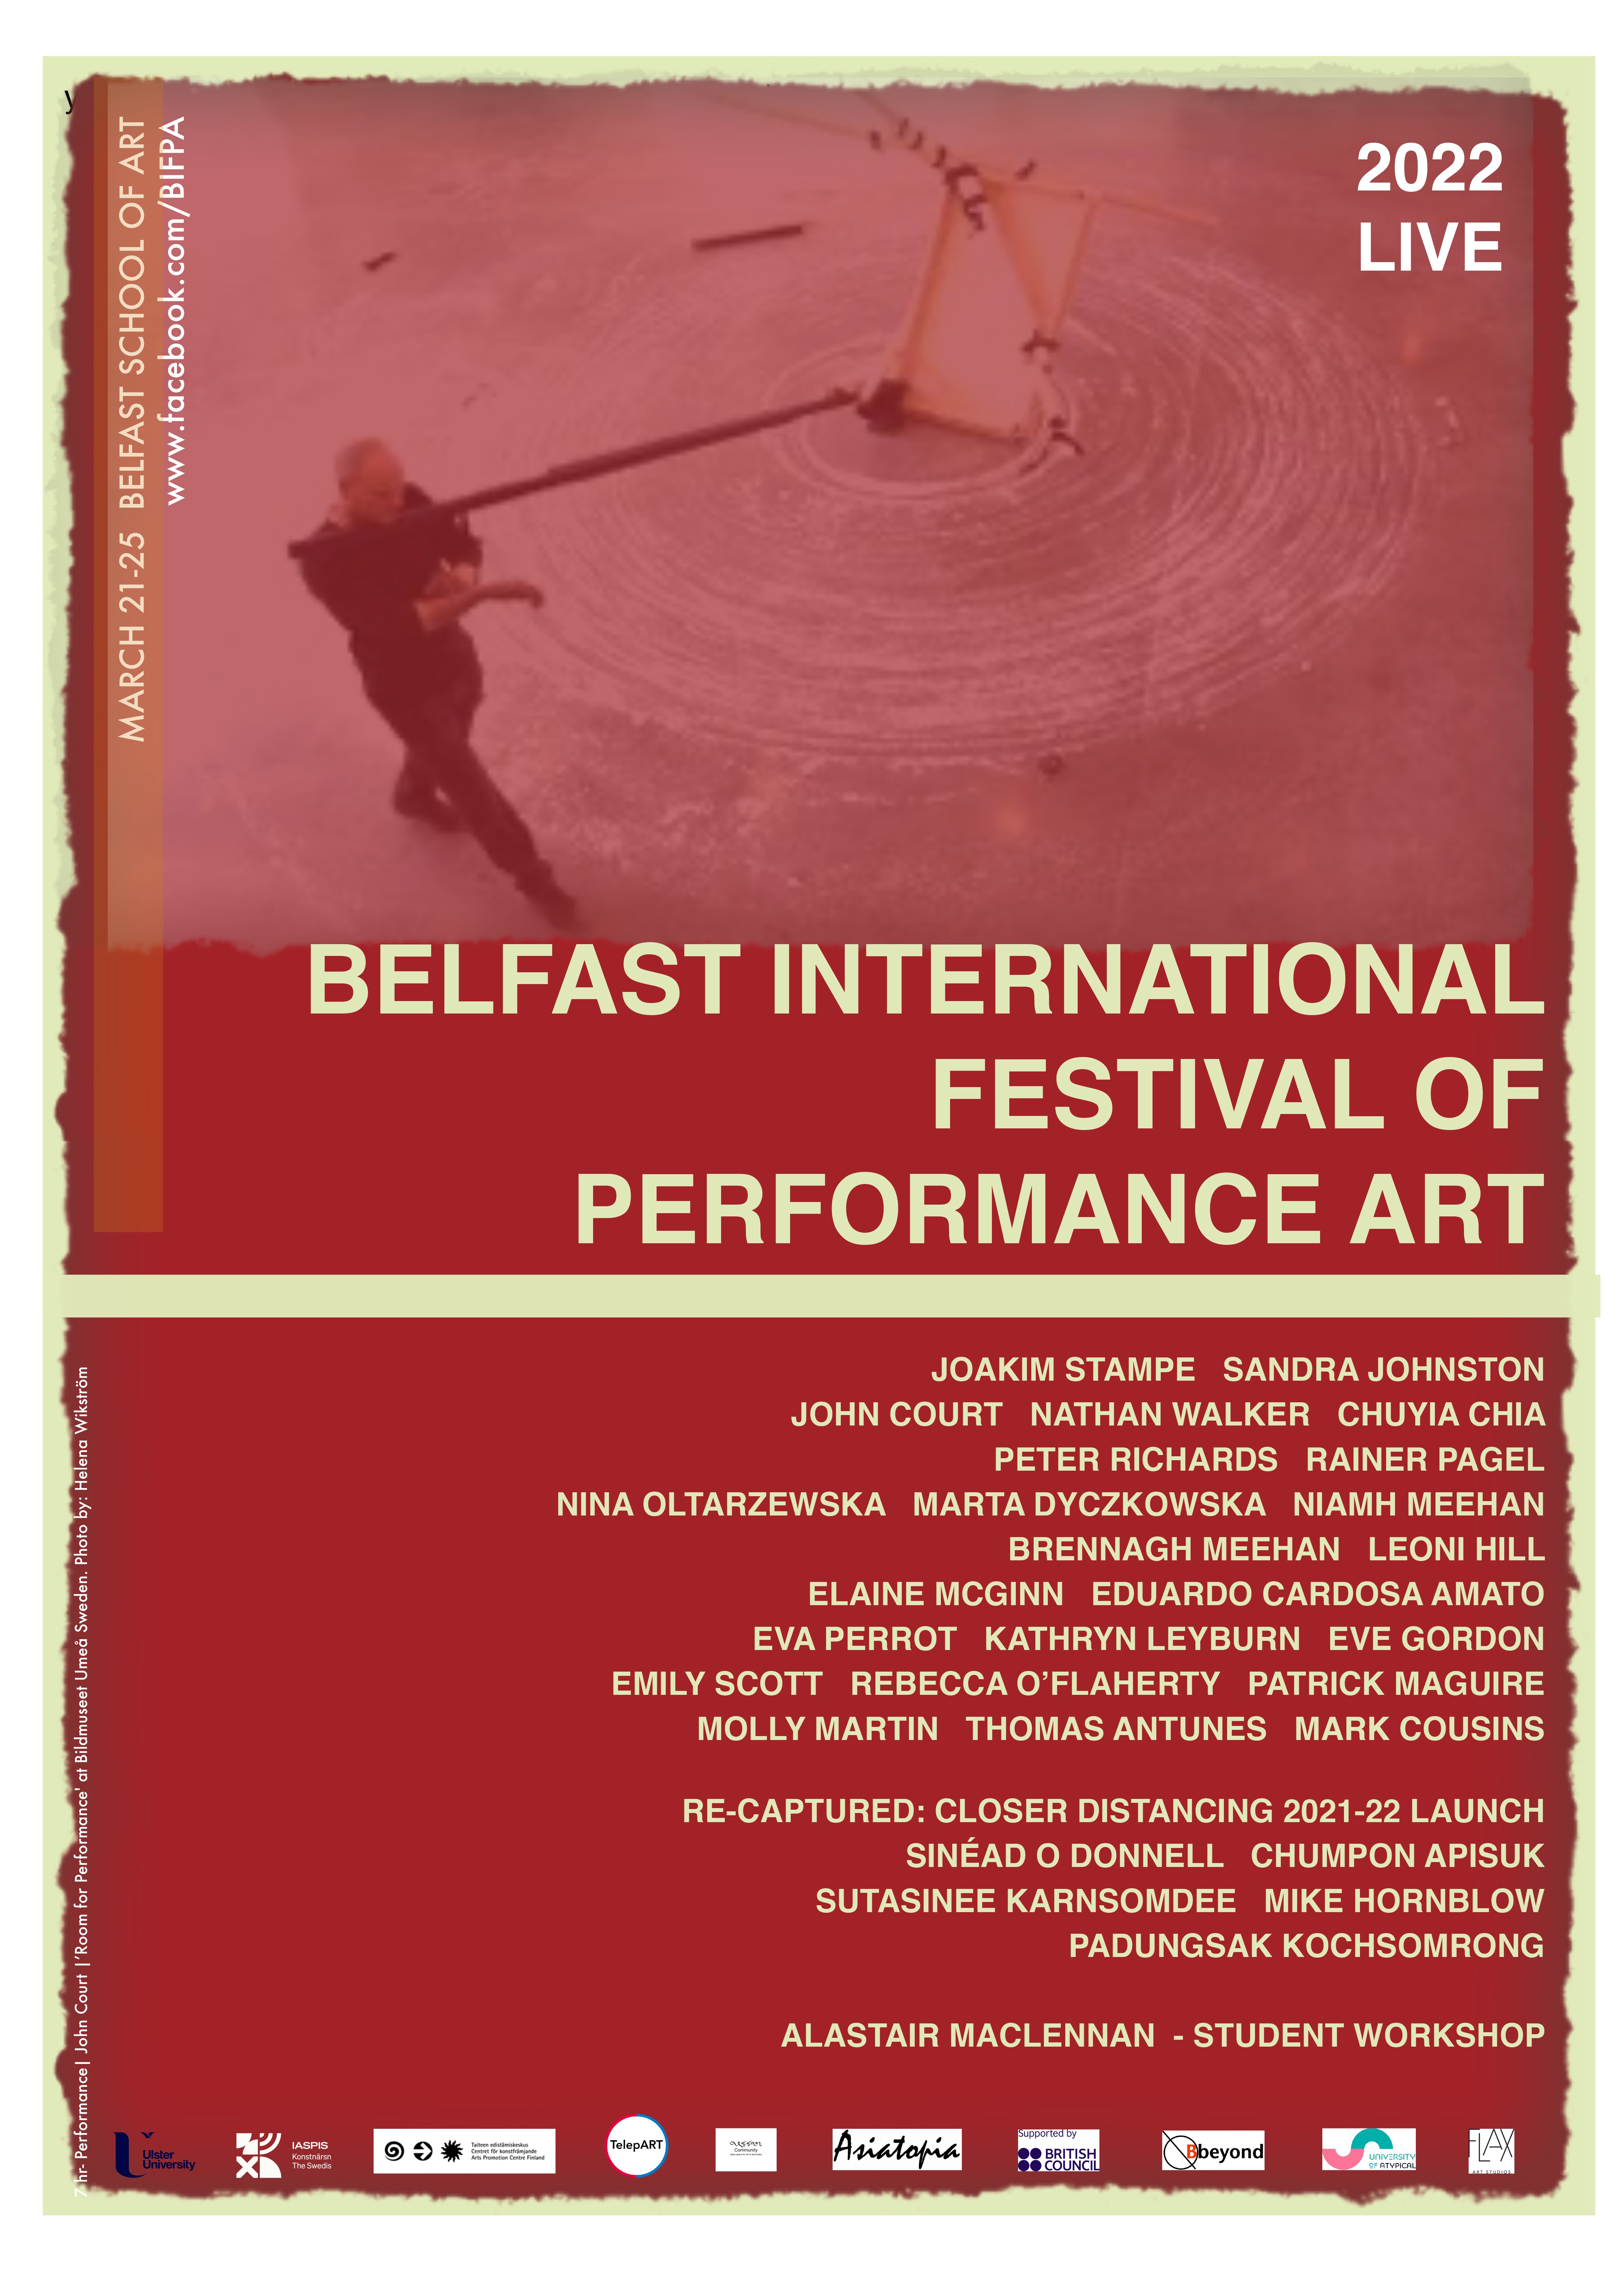 A poster promoting the Belfast International Festival of Performance Art 2022 featuring a human figure dressed in black walking over chalky ground while carrying various objects, below which there is text identifying the artists participating in the festival